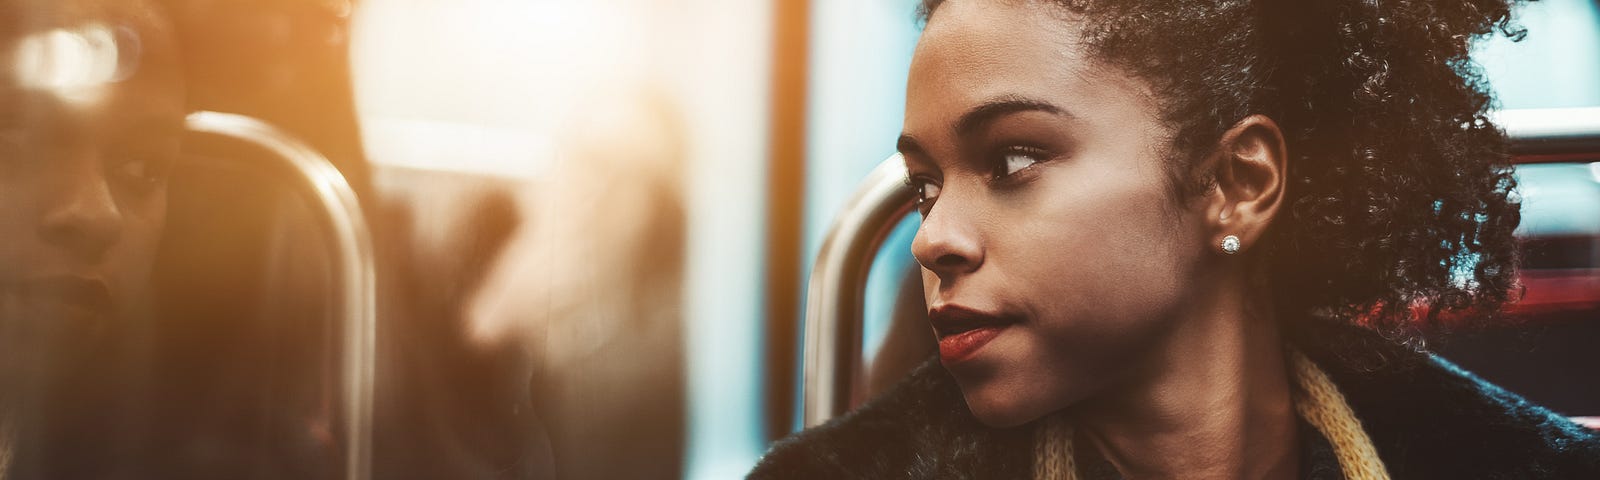 A pensive black woman looks out the window of a bus.